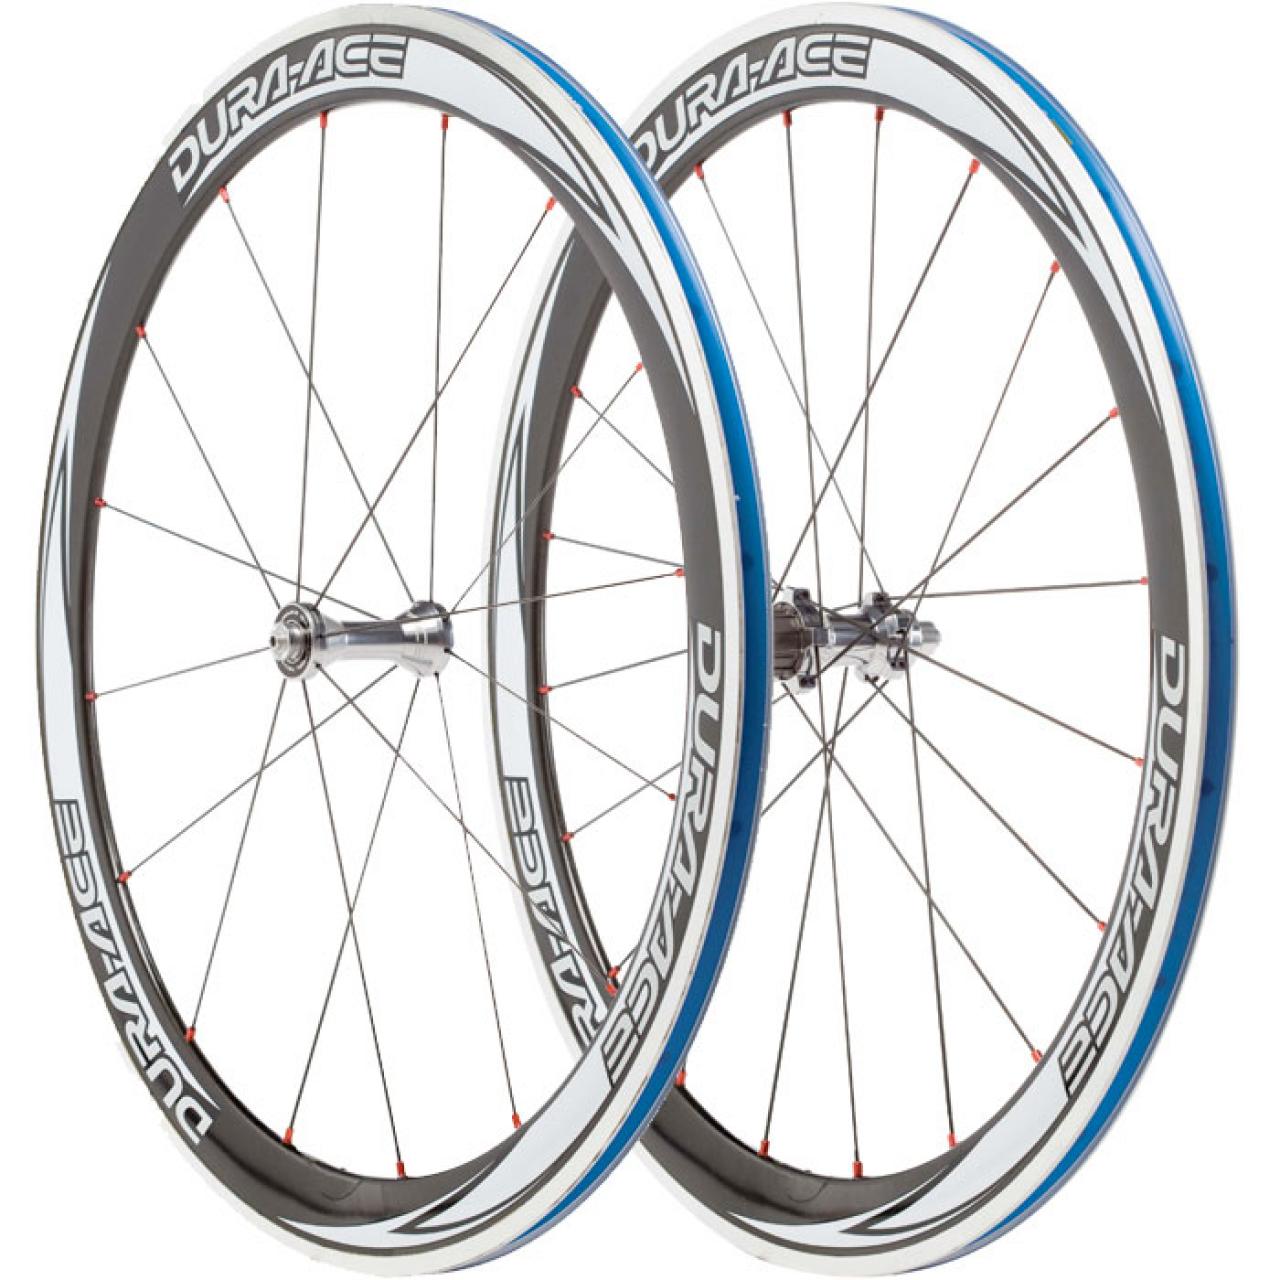 Review: Shimano WH-7850 Dura Ace Carbon Clincher wheelset | road.cc